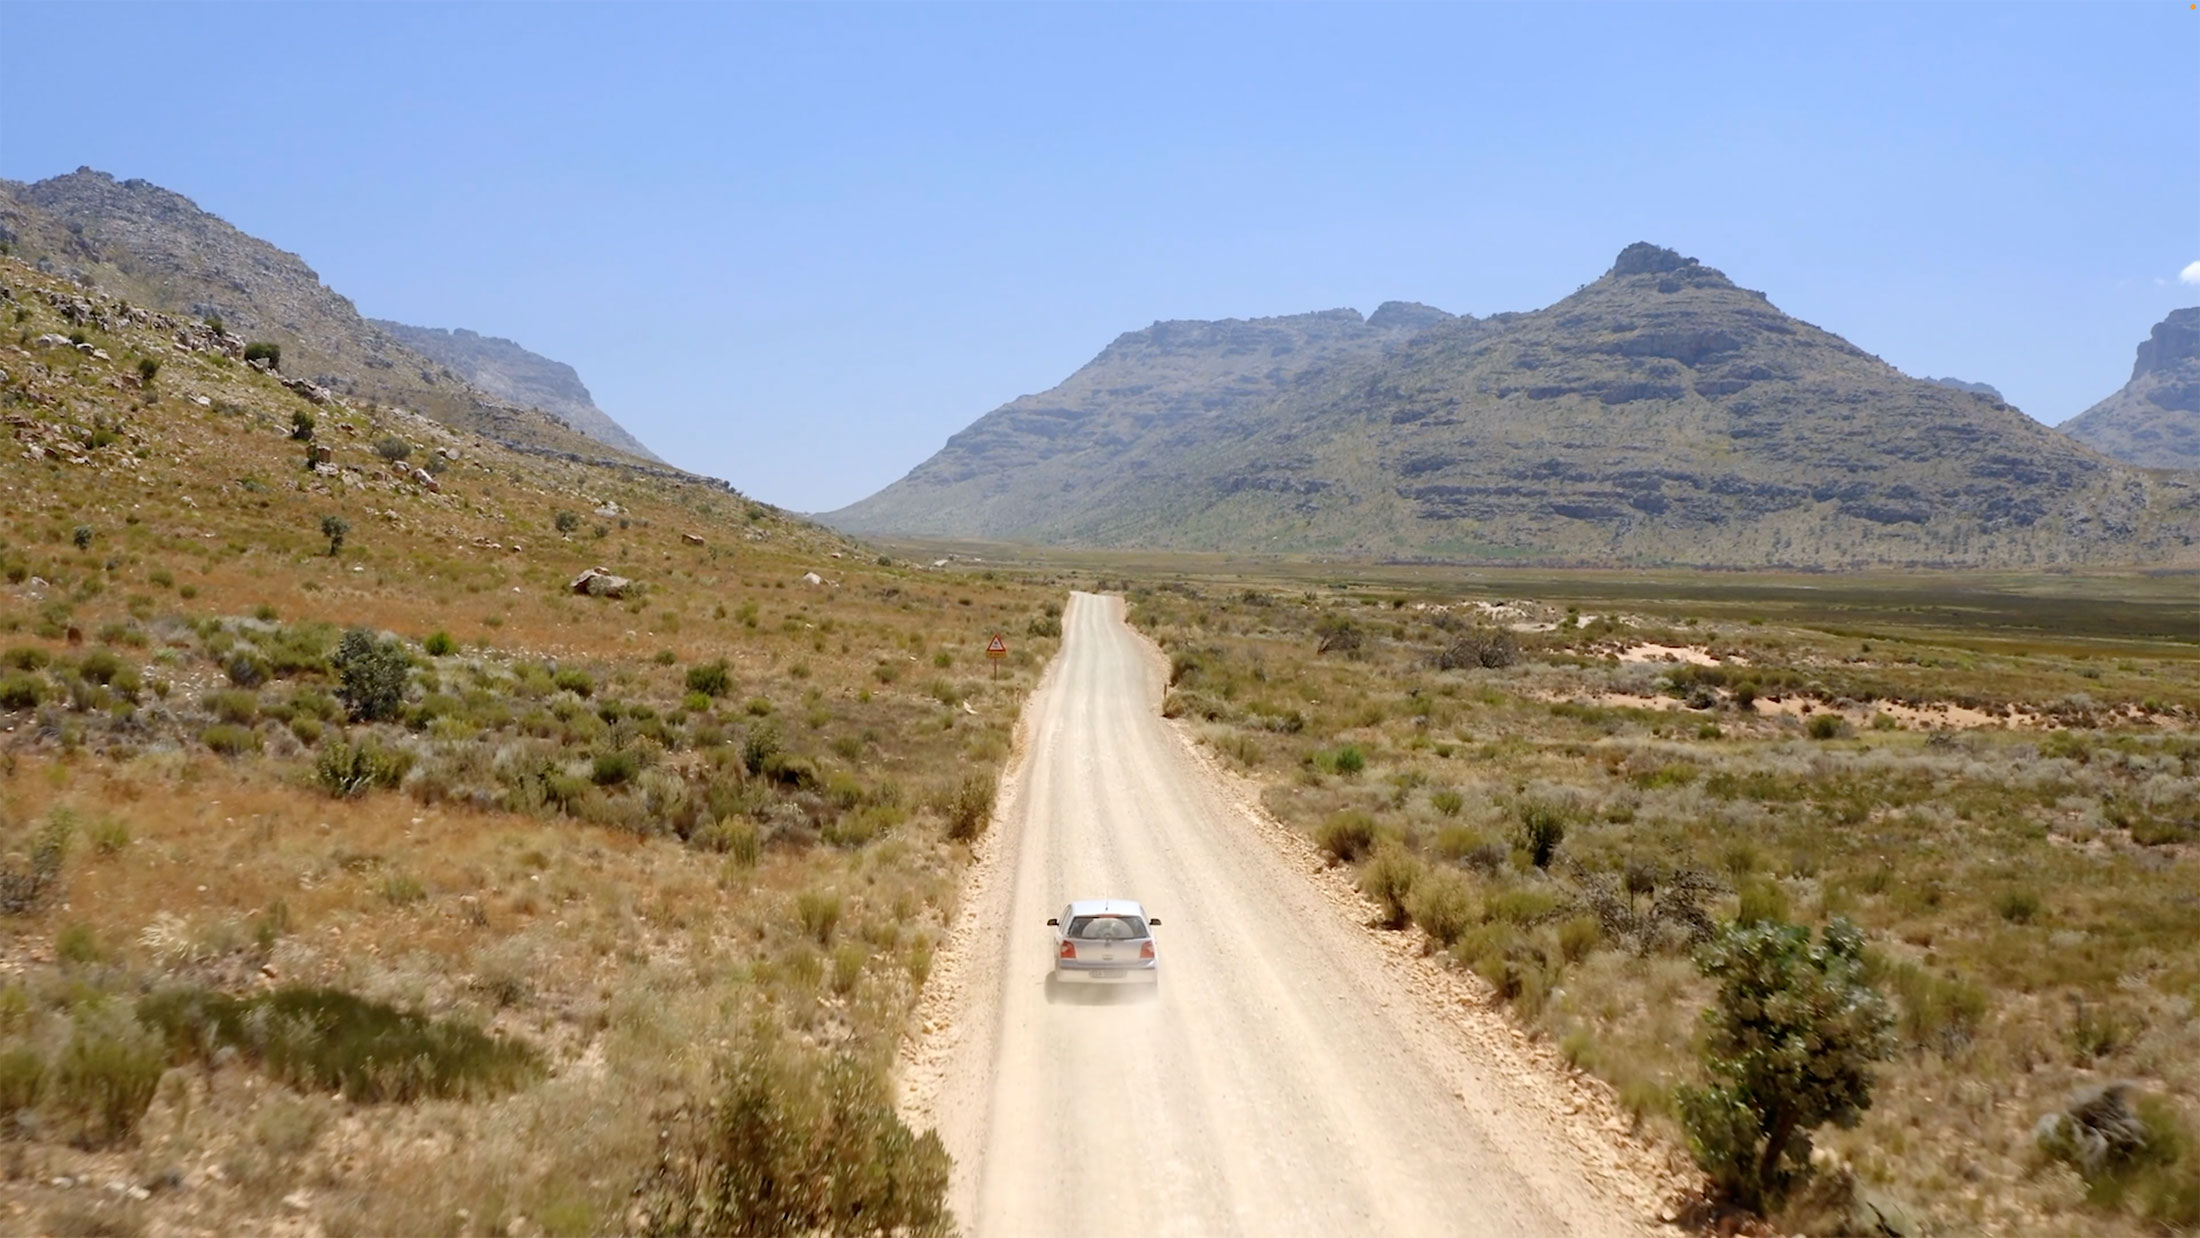 a silver car driving down a long straight dirt road in a remote desert landscape with large hills or mountains in the background.